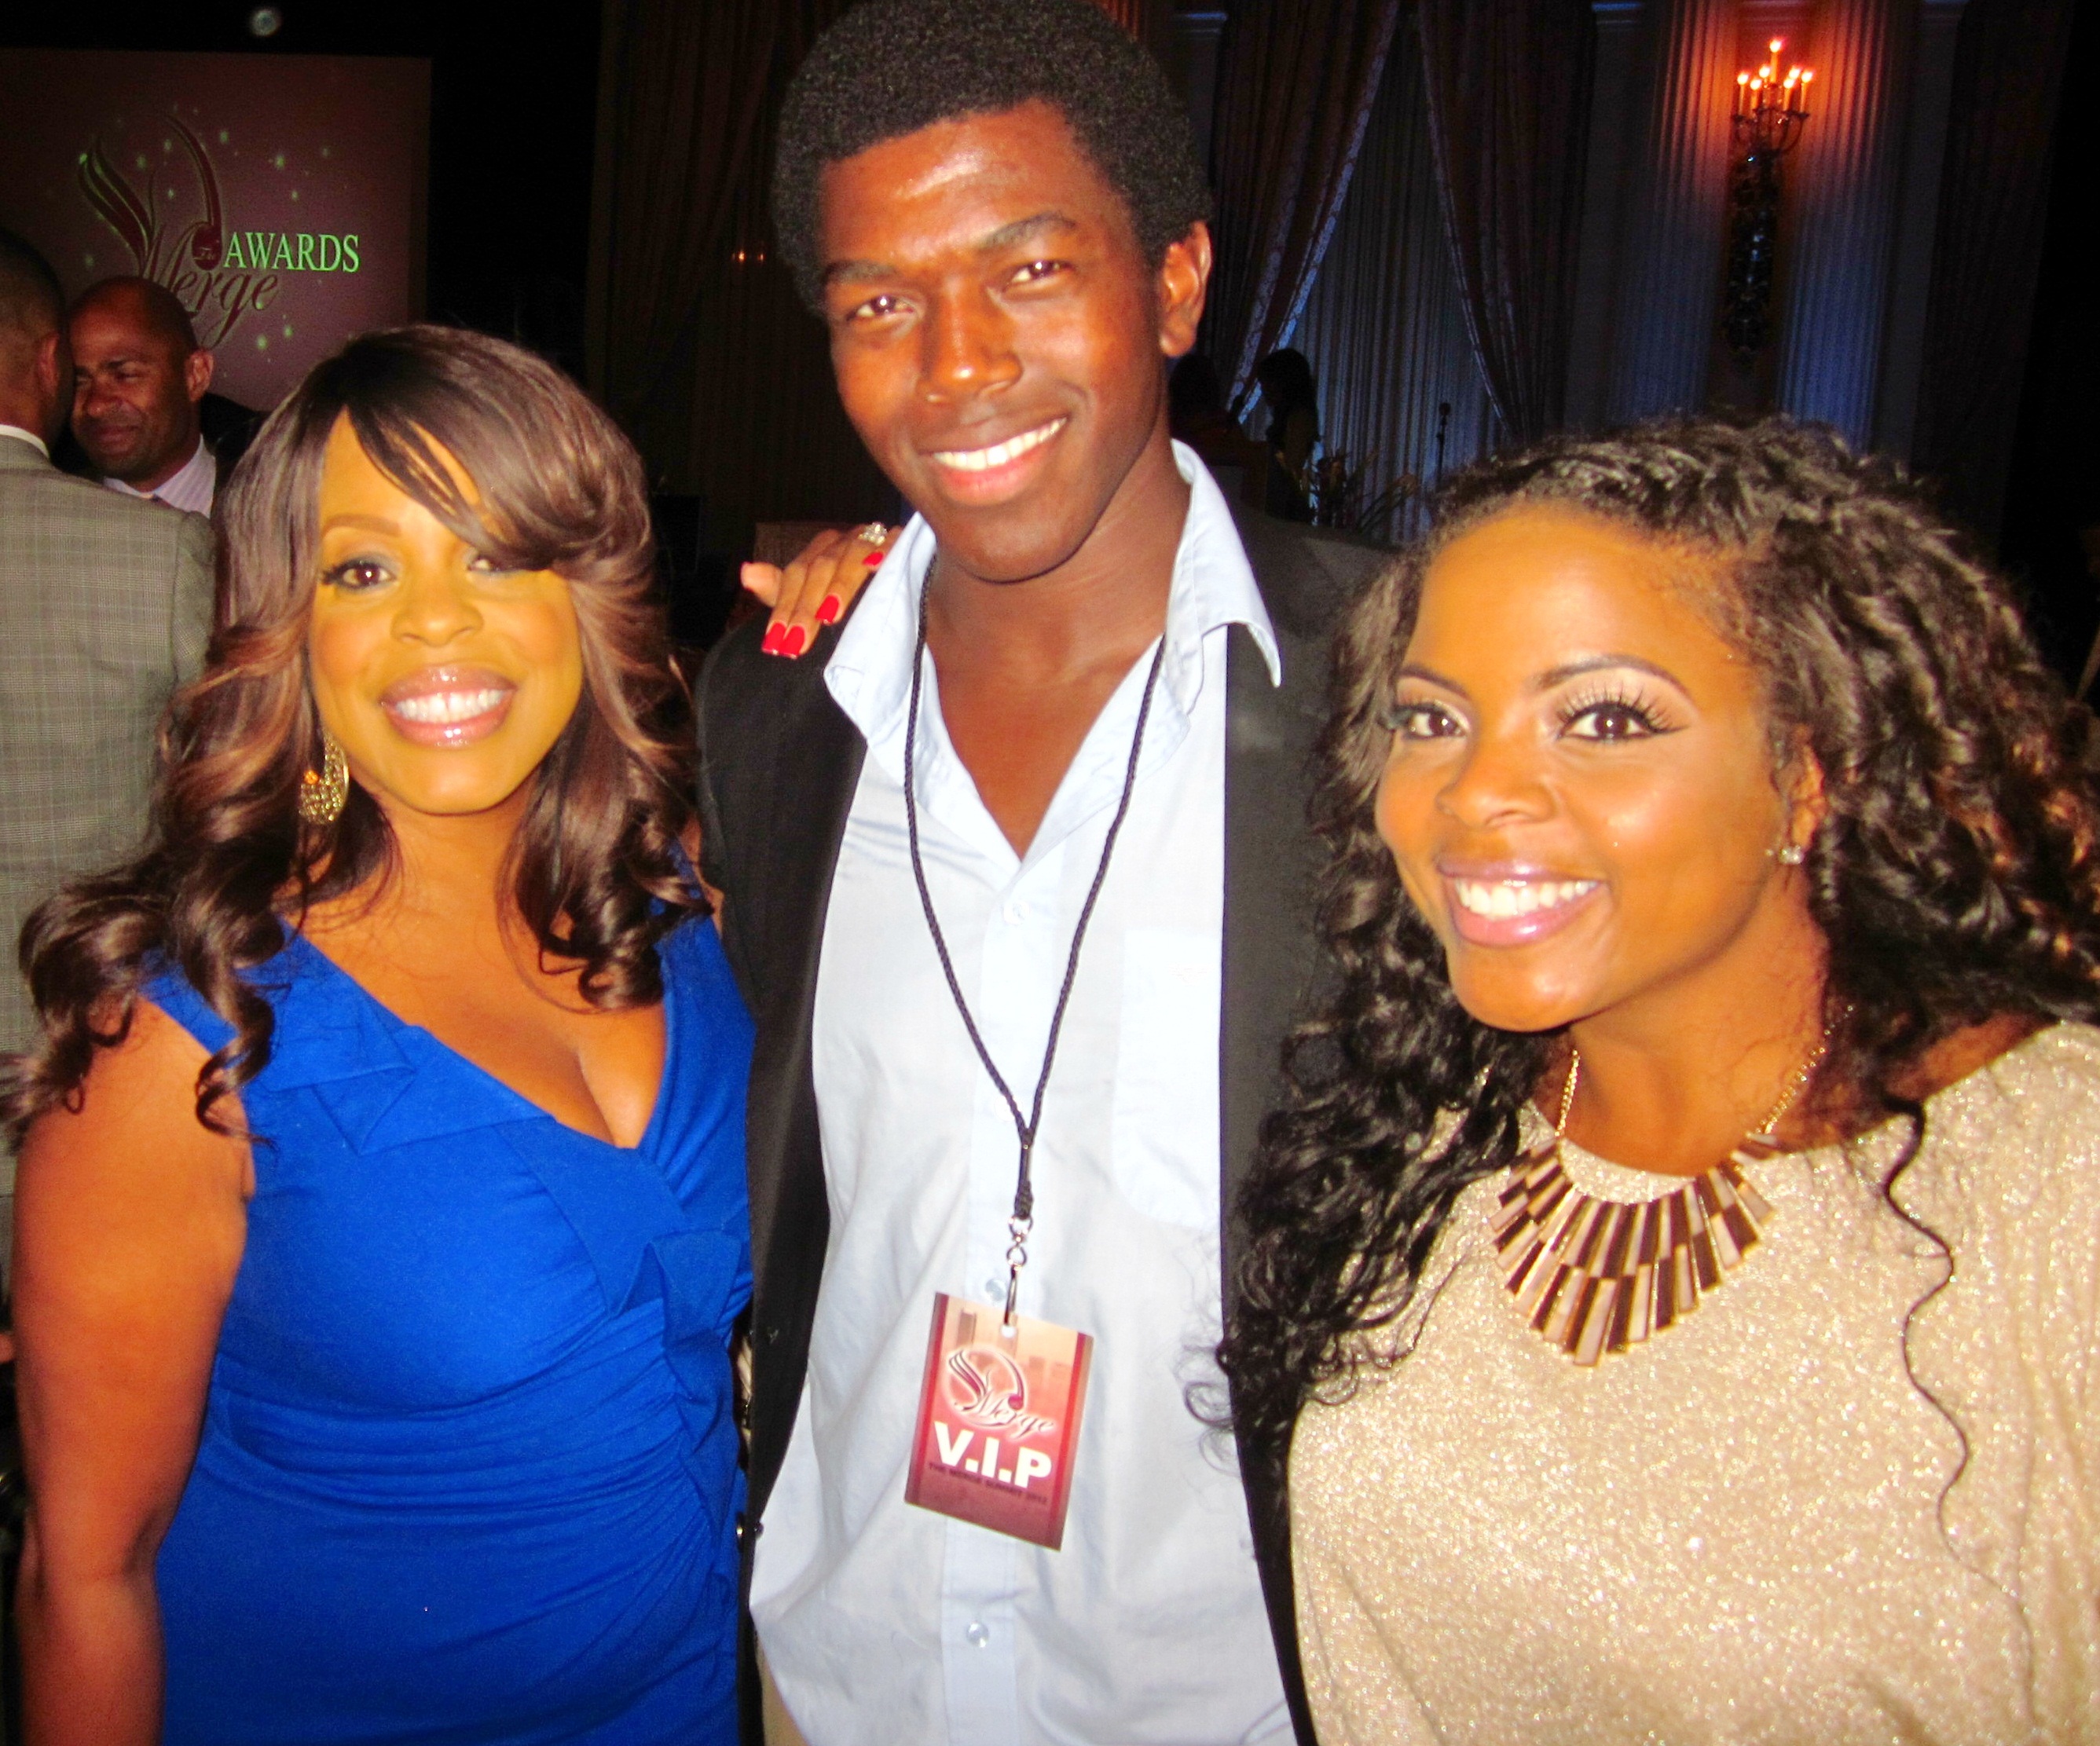 The Merge Summit 2012, Niecy Nash, LeRoy Mobley, Brely Evans